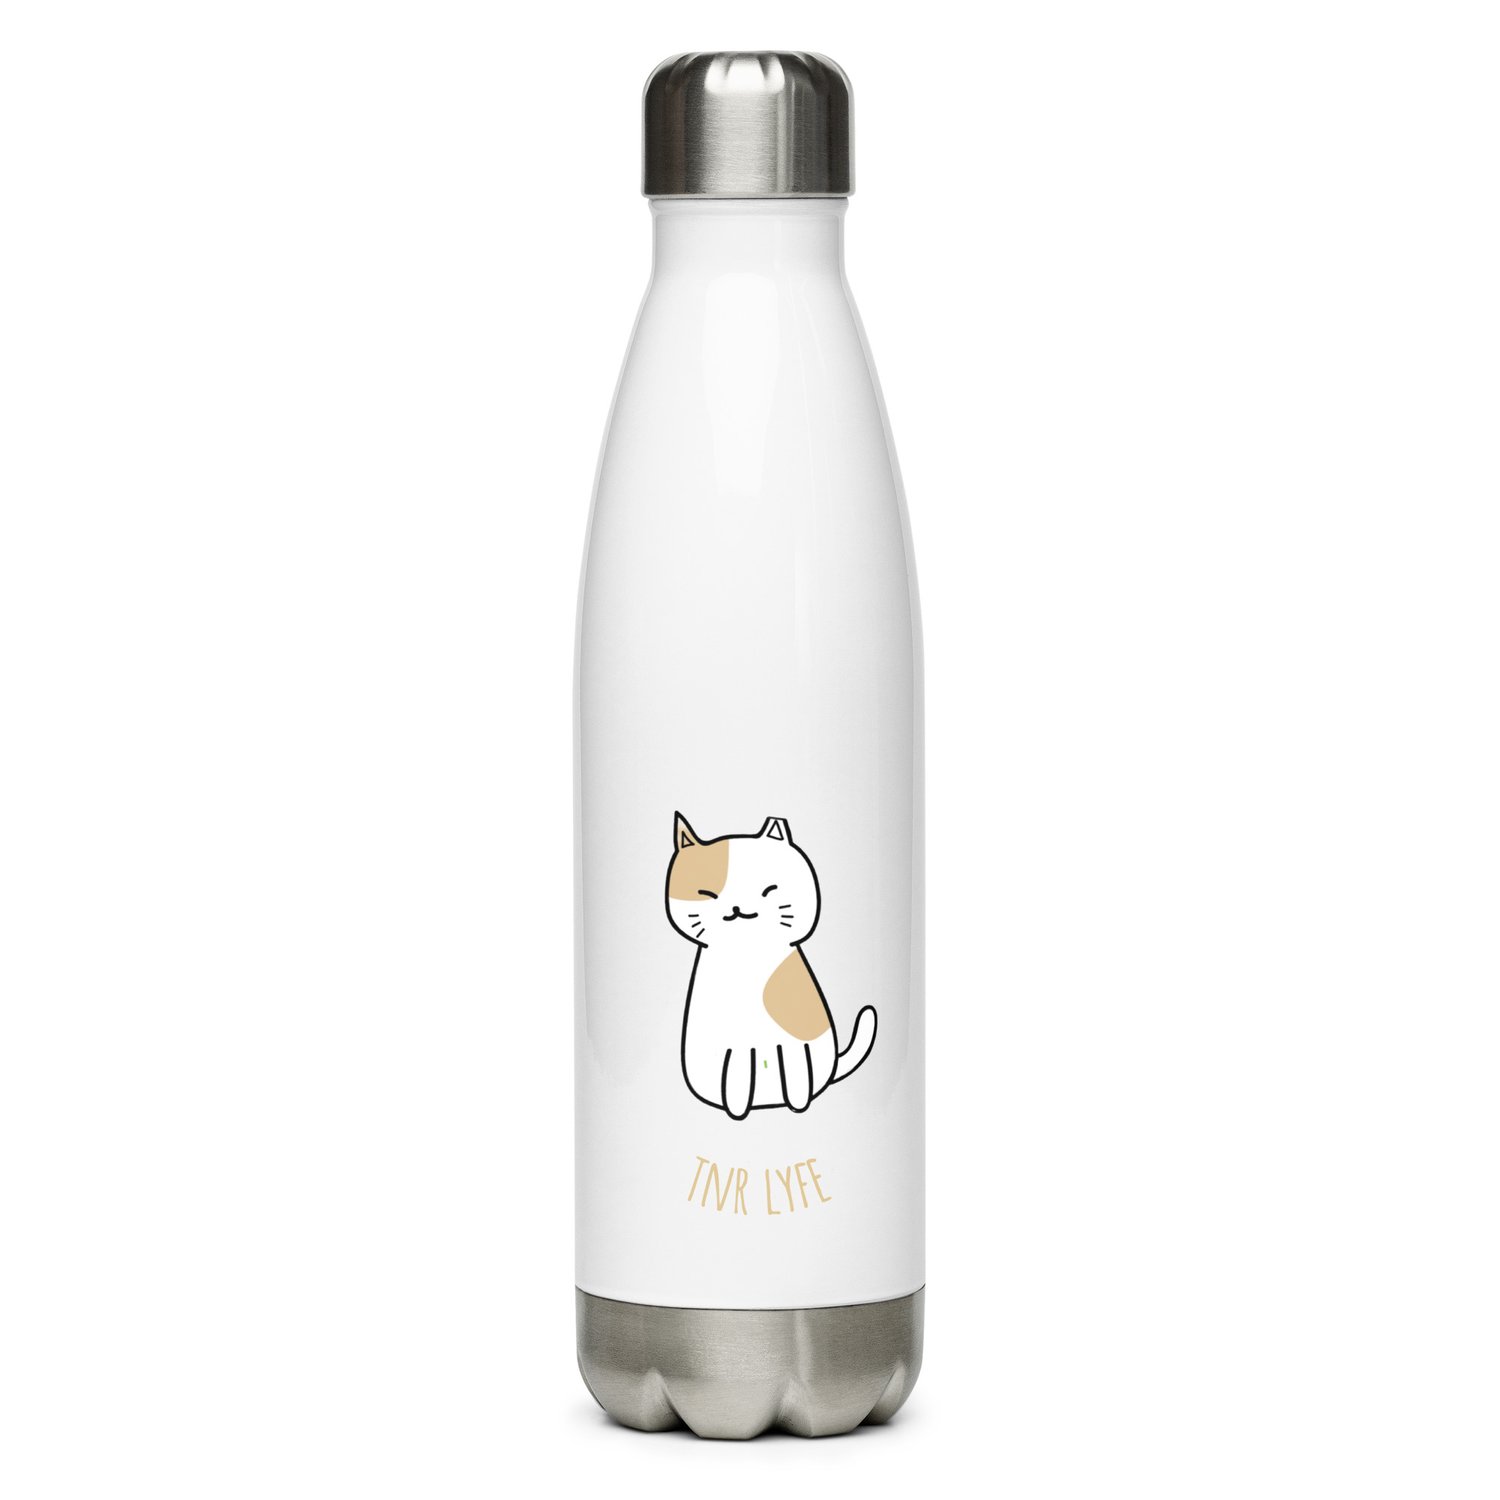 Stainless Steel Portable Thermal Cat Ear Water Bottle –